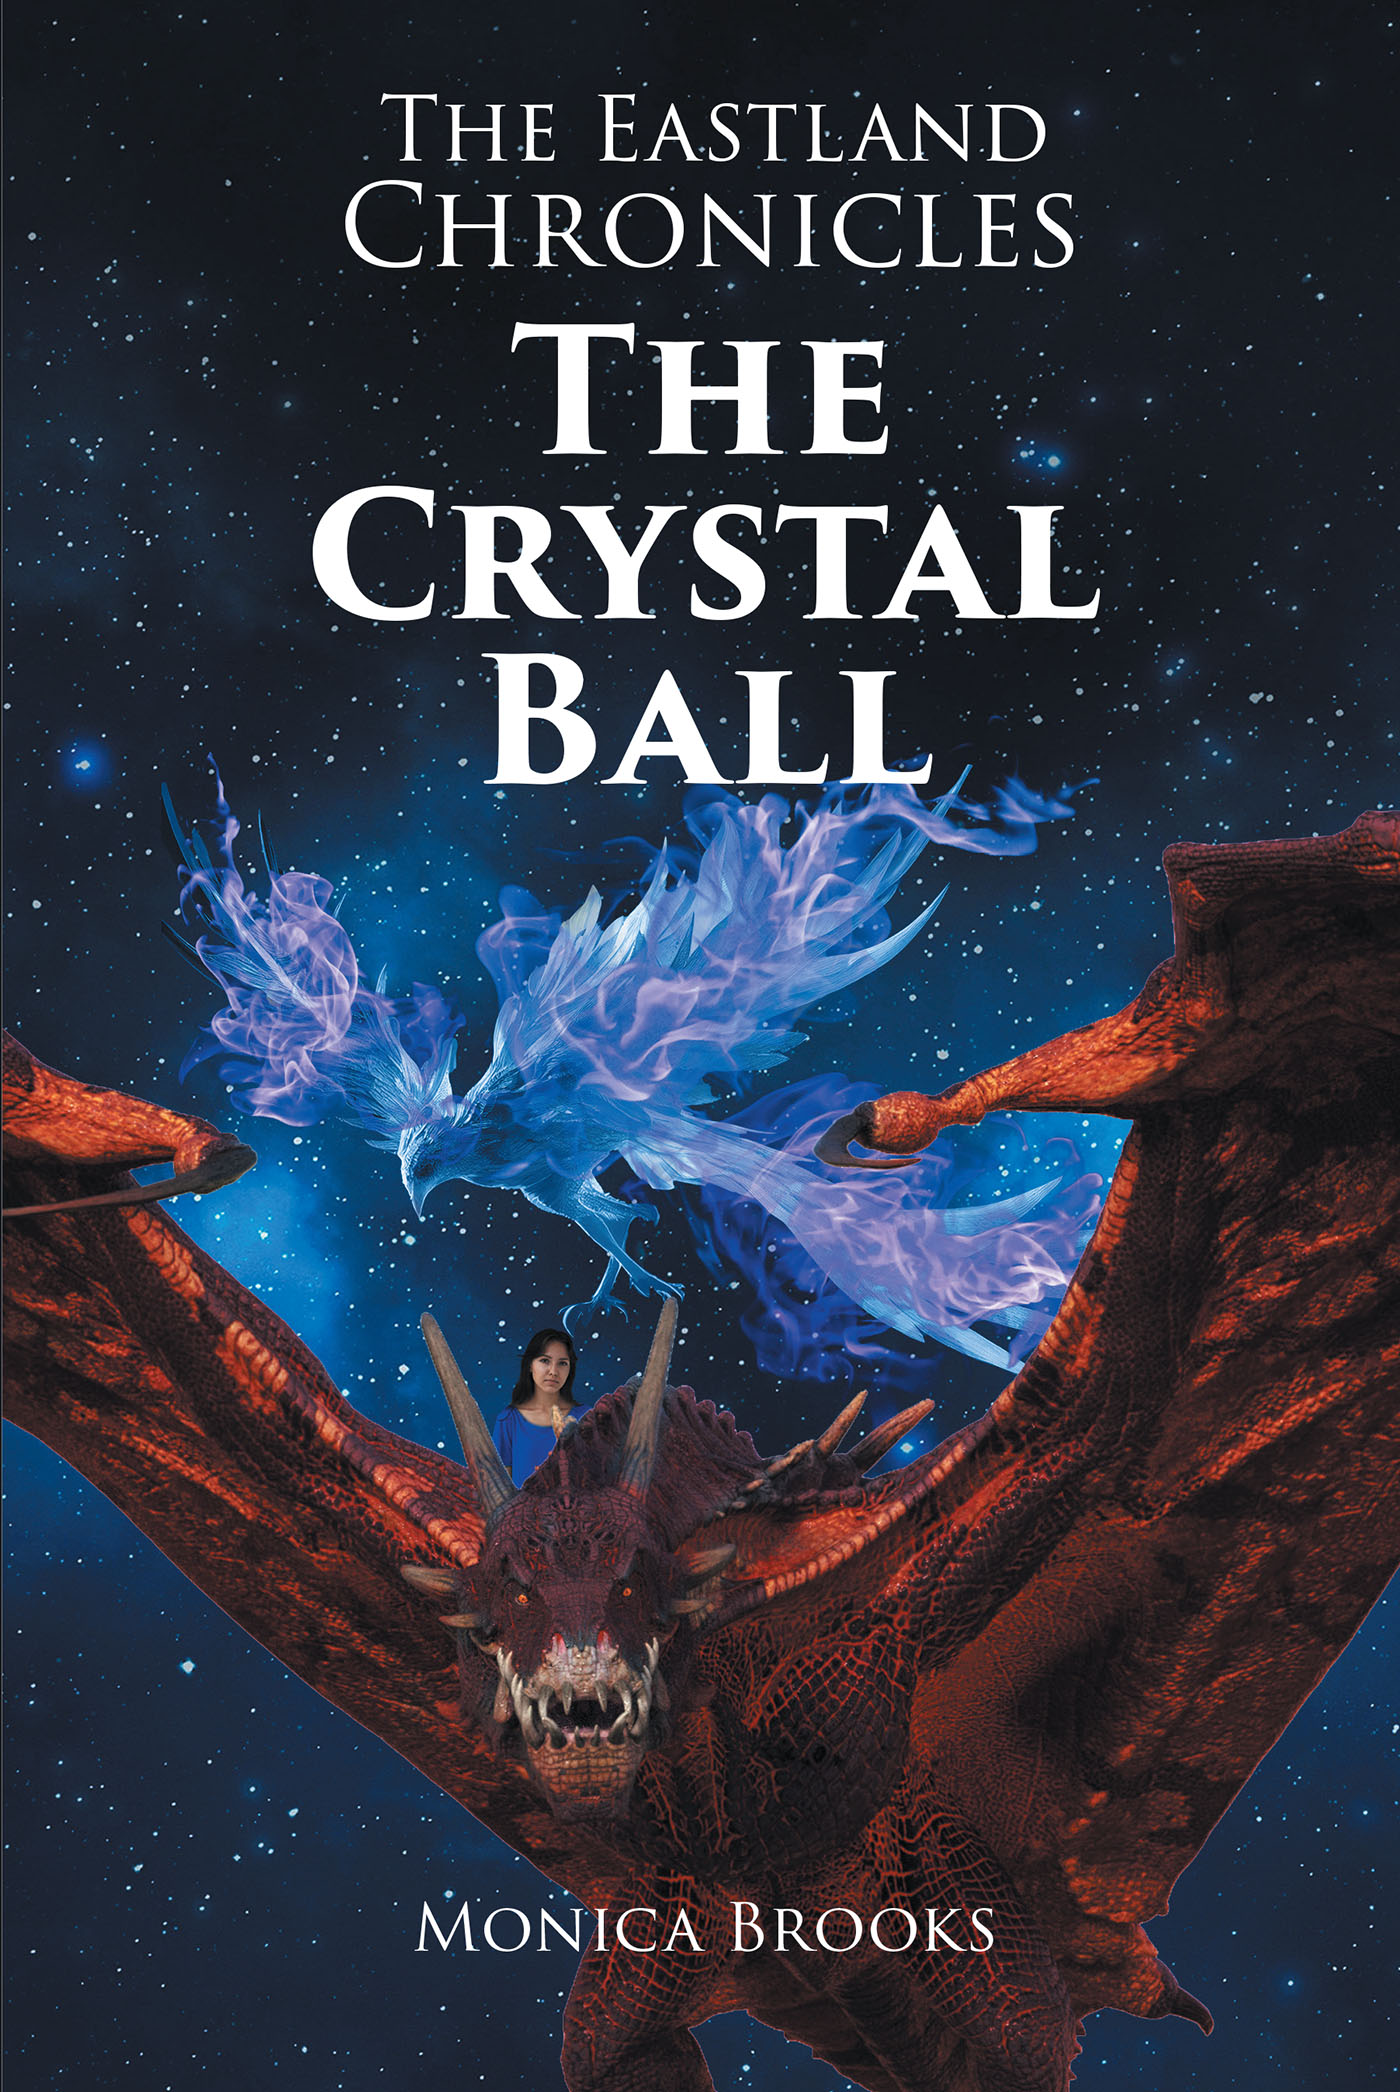 Author Monica Brooks’s New Book, “The Eastland Chronicles: The Crystal Ball,” Follows Two Boys Who Must Rescue Their Loved Ones After They Are Taken by Unknown Creatures